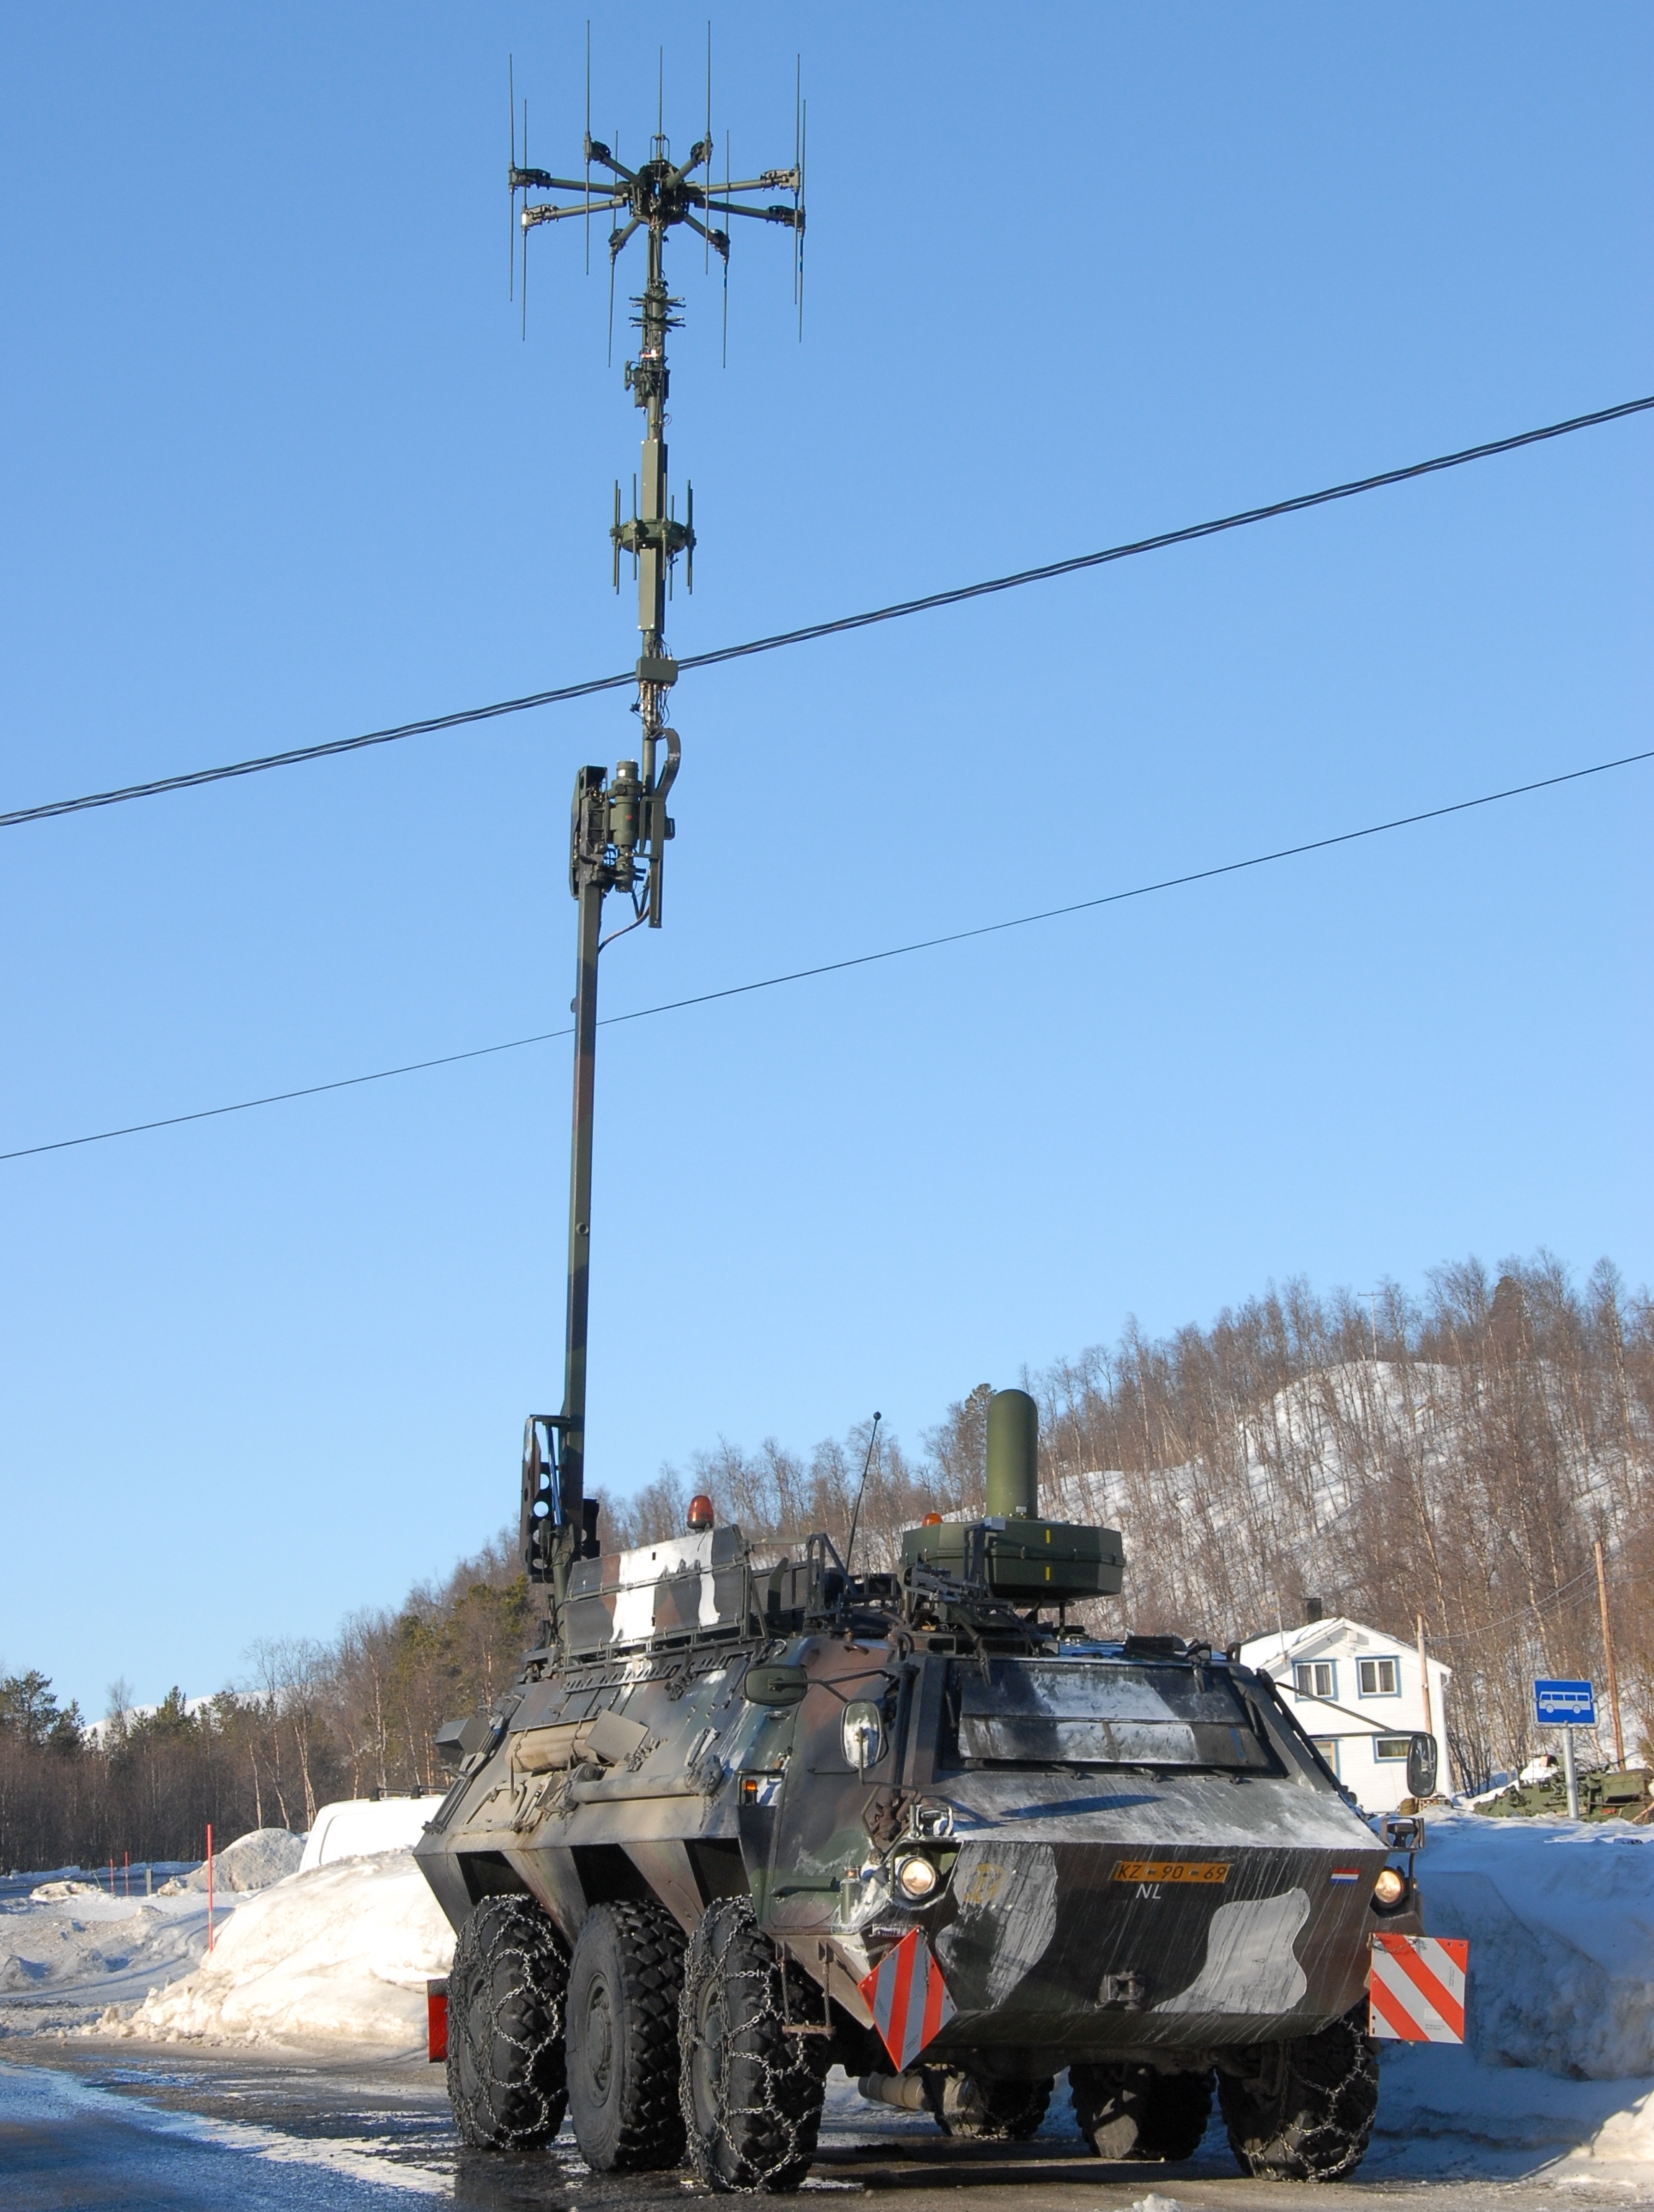 TPz FUCHS 1 of the Dutch army in electronic warfare configuration